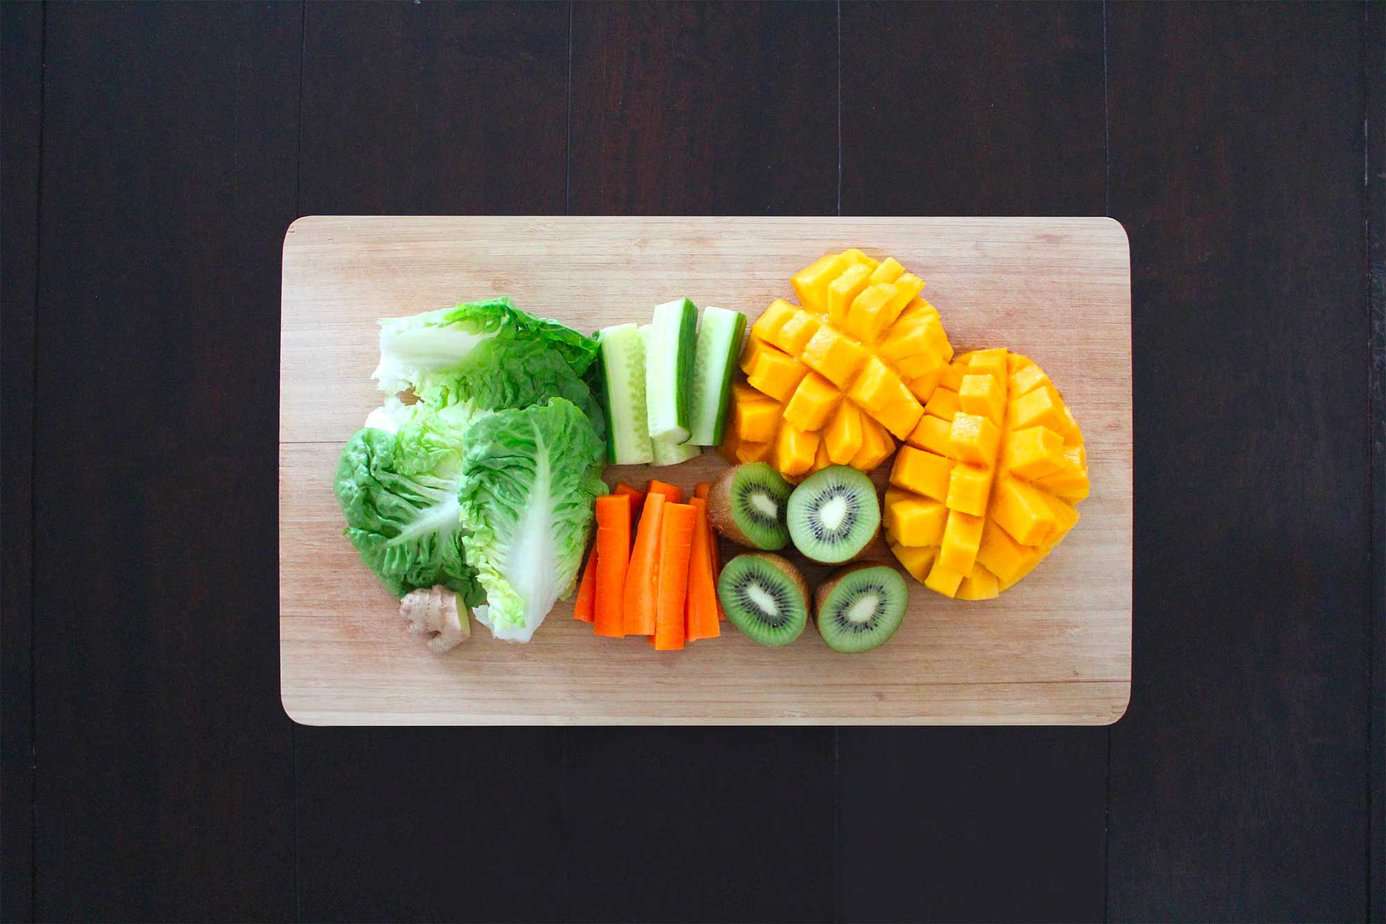 assortment of healthy foods arranged on a cutting board to promote better nutrition in recovery